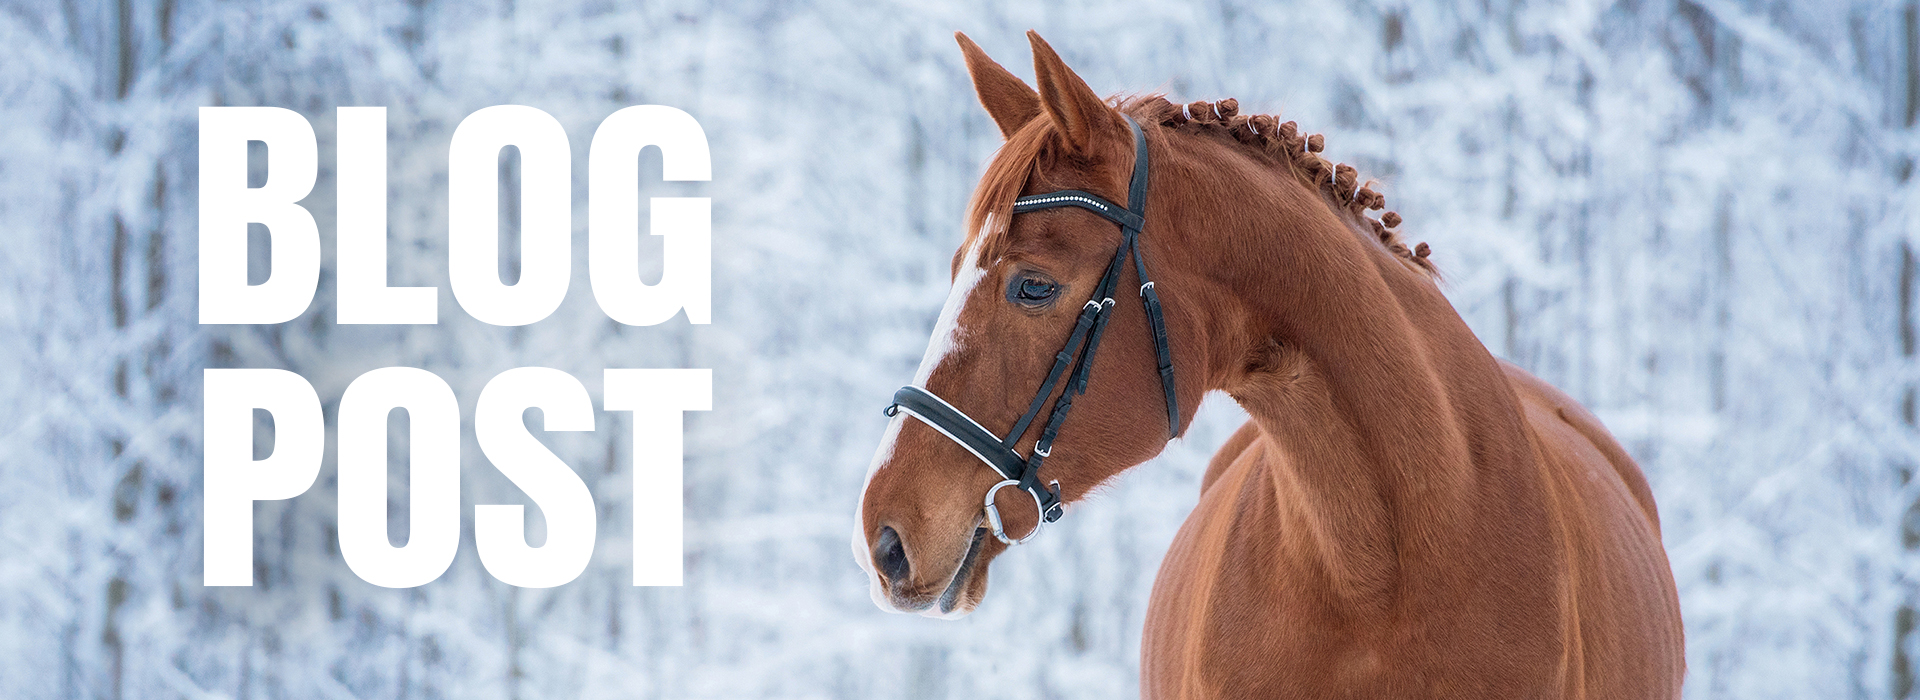 How to properly prepare your horse for winter ?